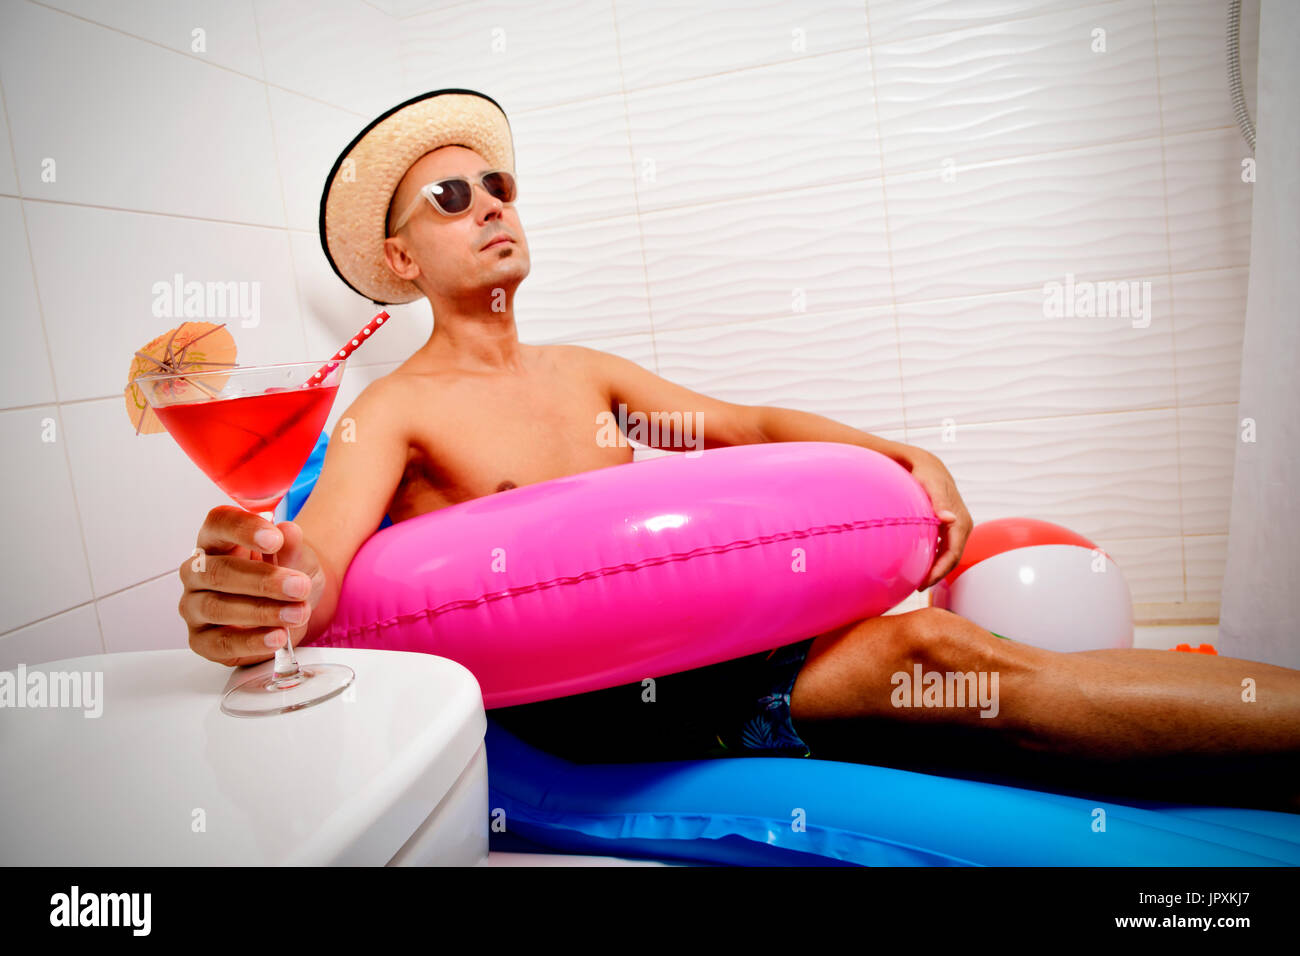 a young caucasian man wearing sunglasses, a straw hat and a pink swim ring pretending he is relaxing in a blue air mattress placed in the shower of a  Stock Photo